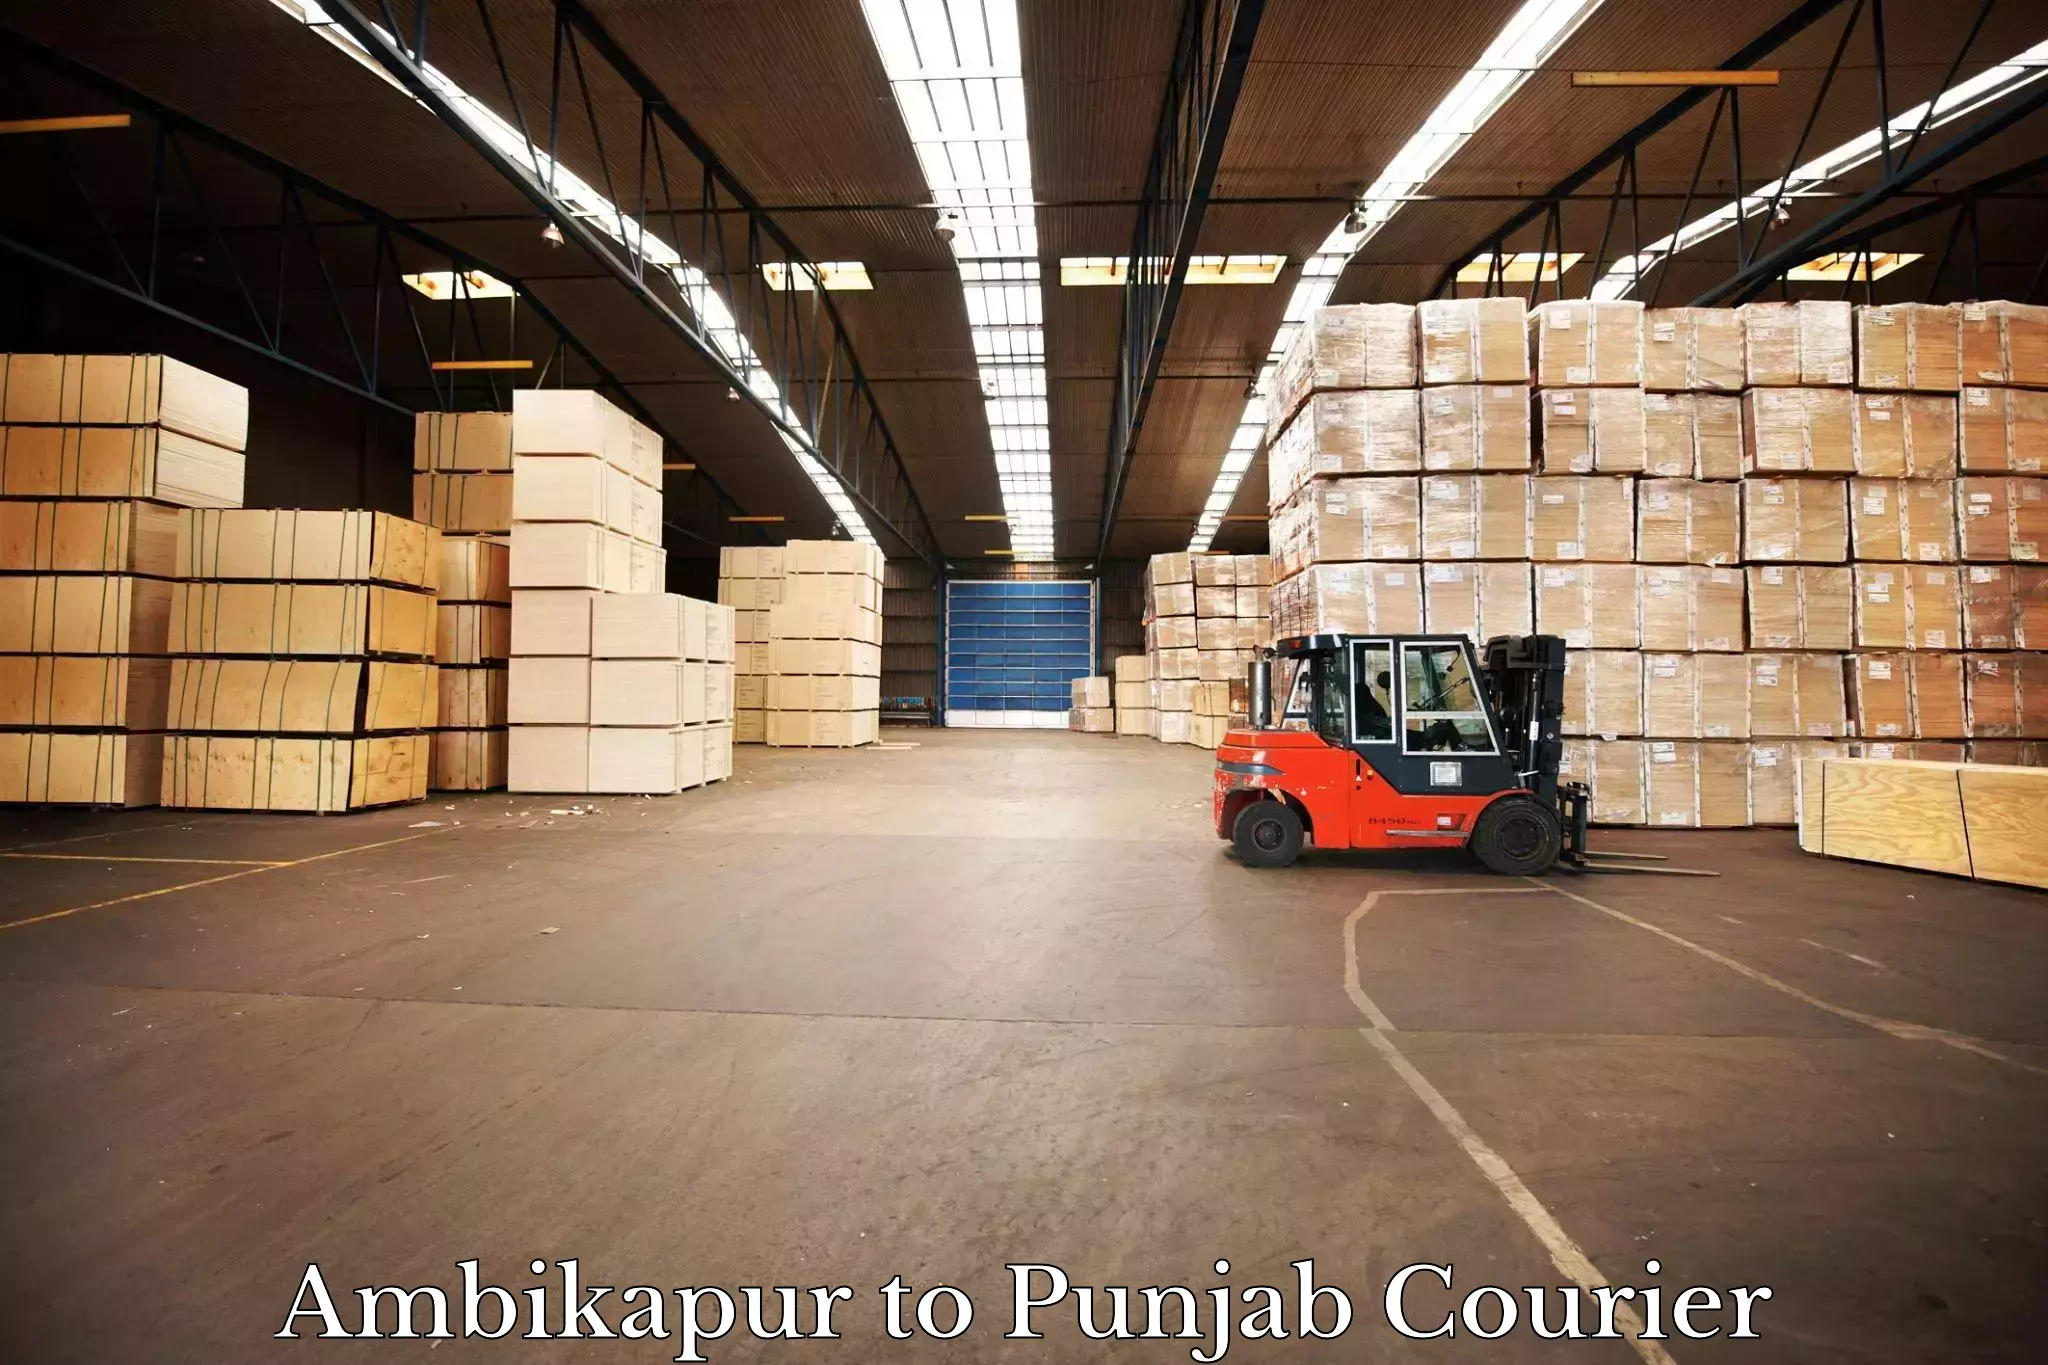 Reliable courier service Ambikapur to Punjab